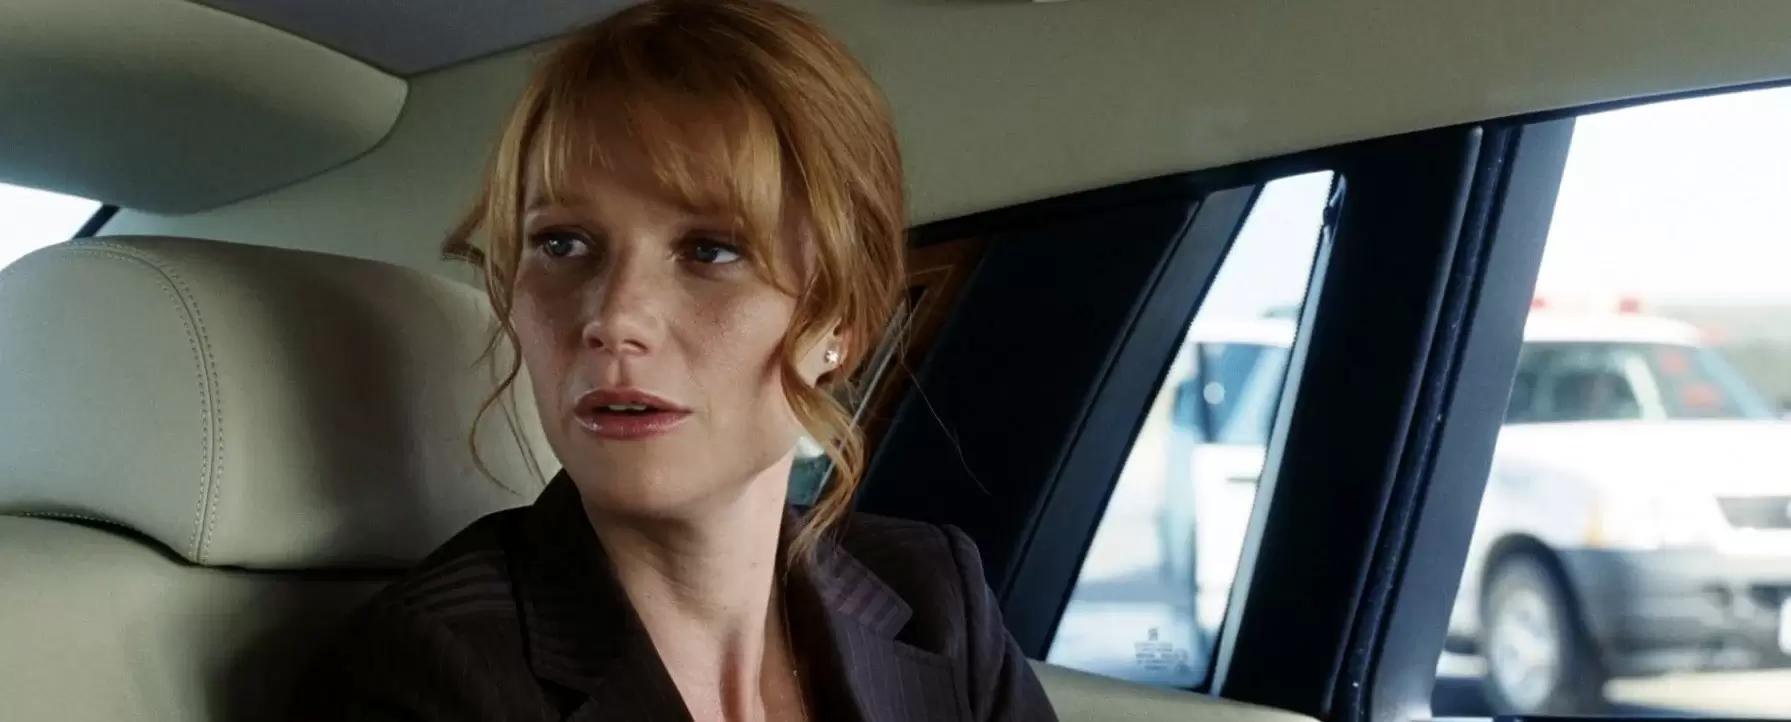 searching for an assistant like Pepper Potts